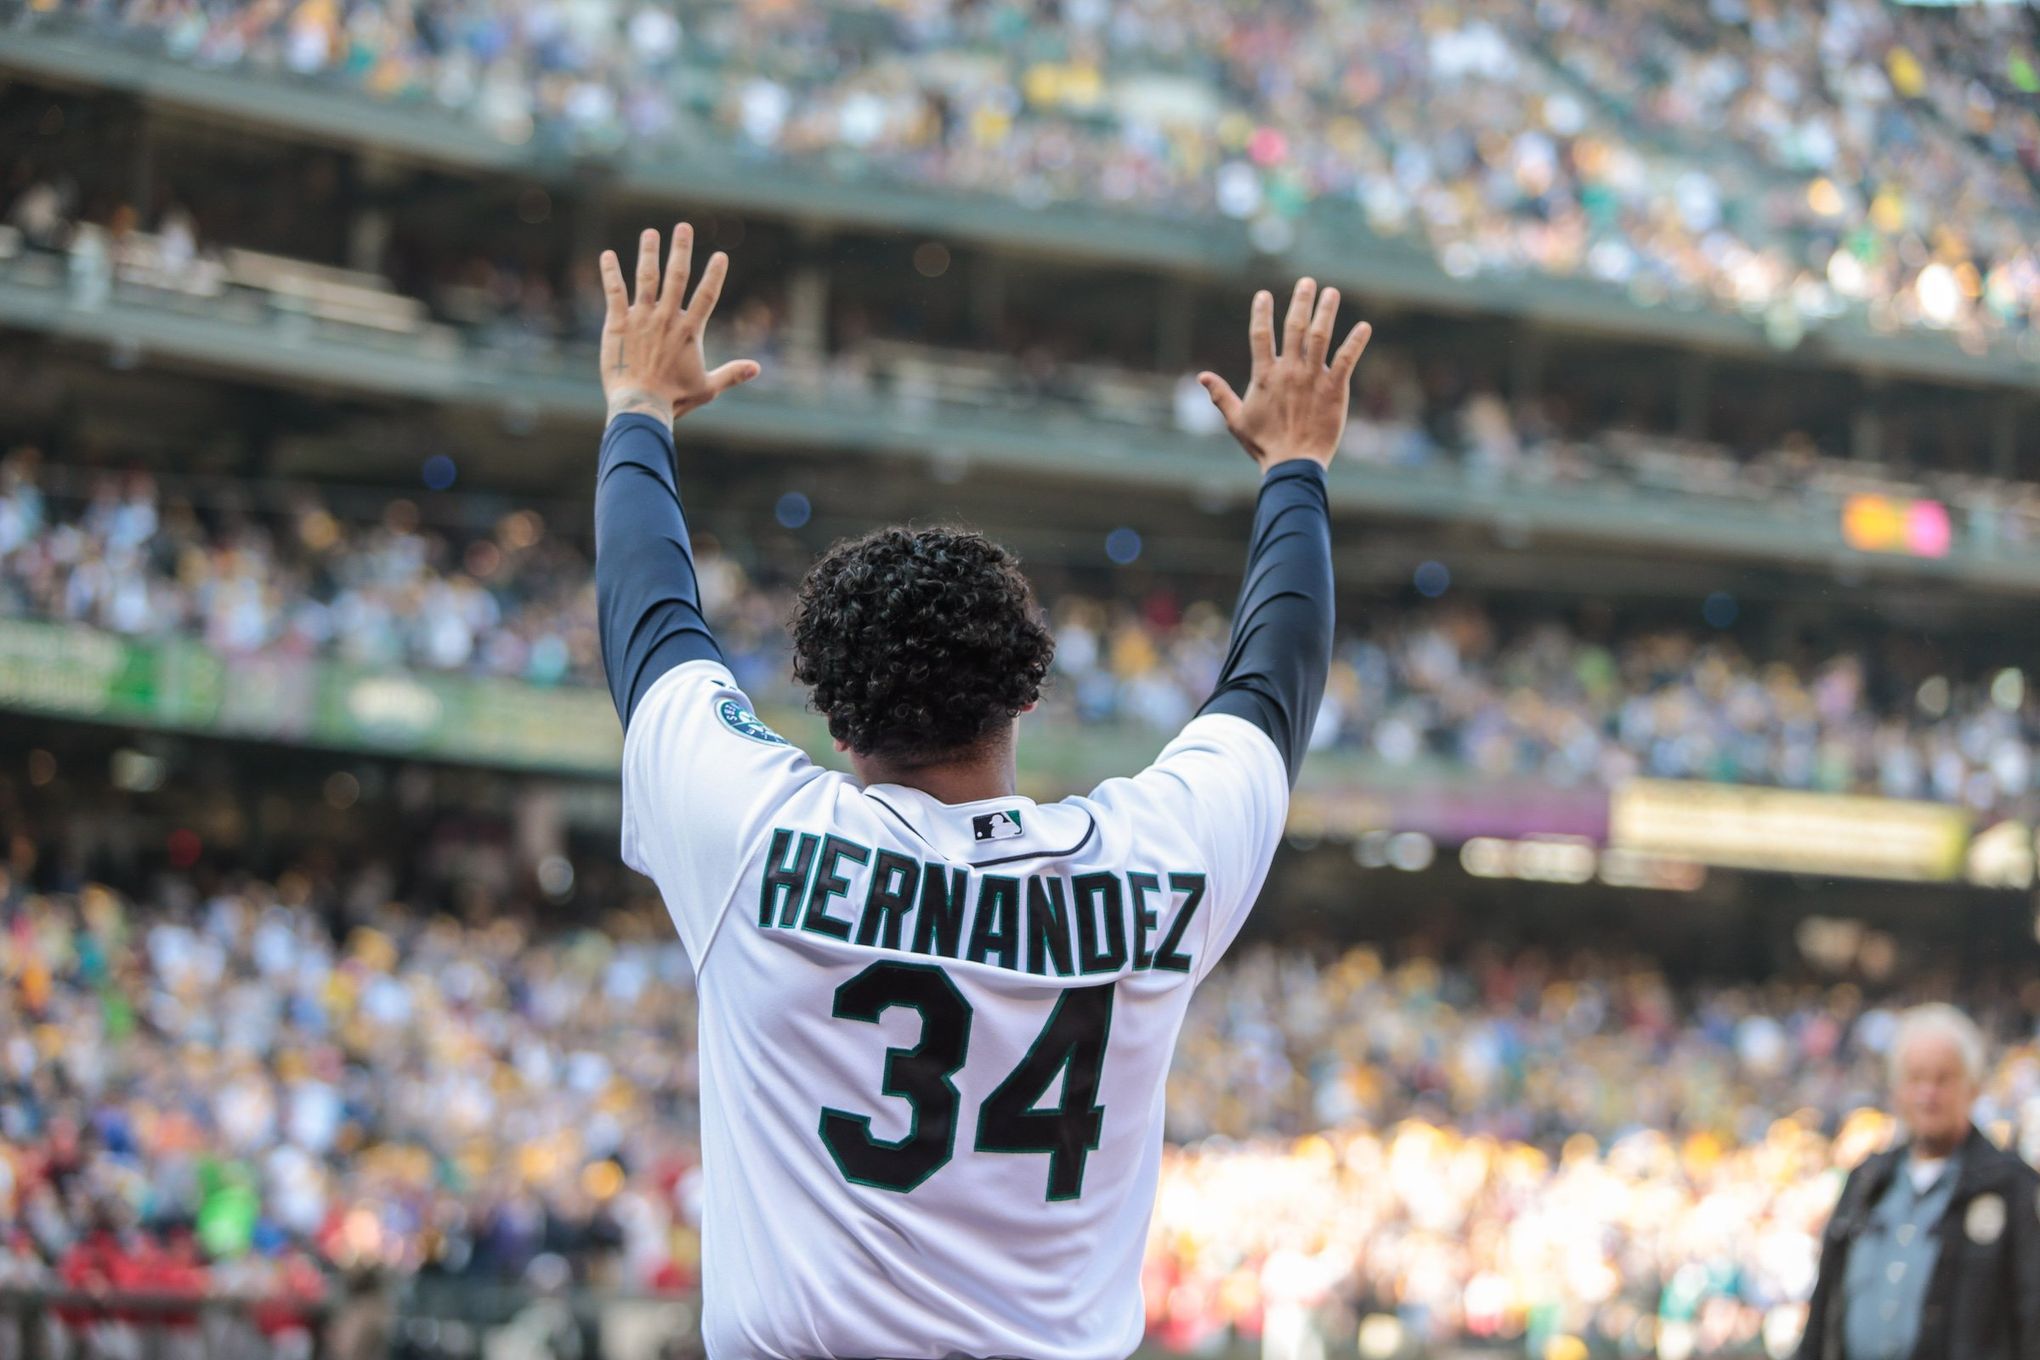 It's a deal: Mariners give Hernandez a King's ransom